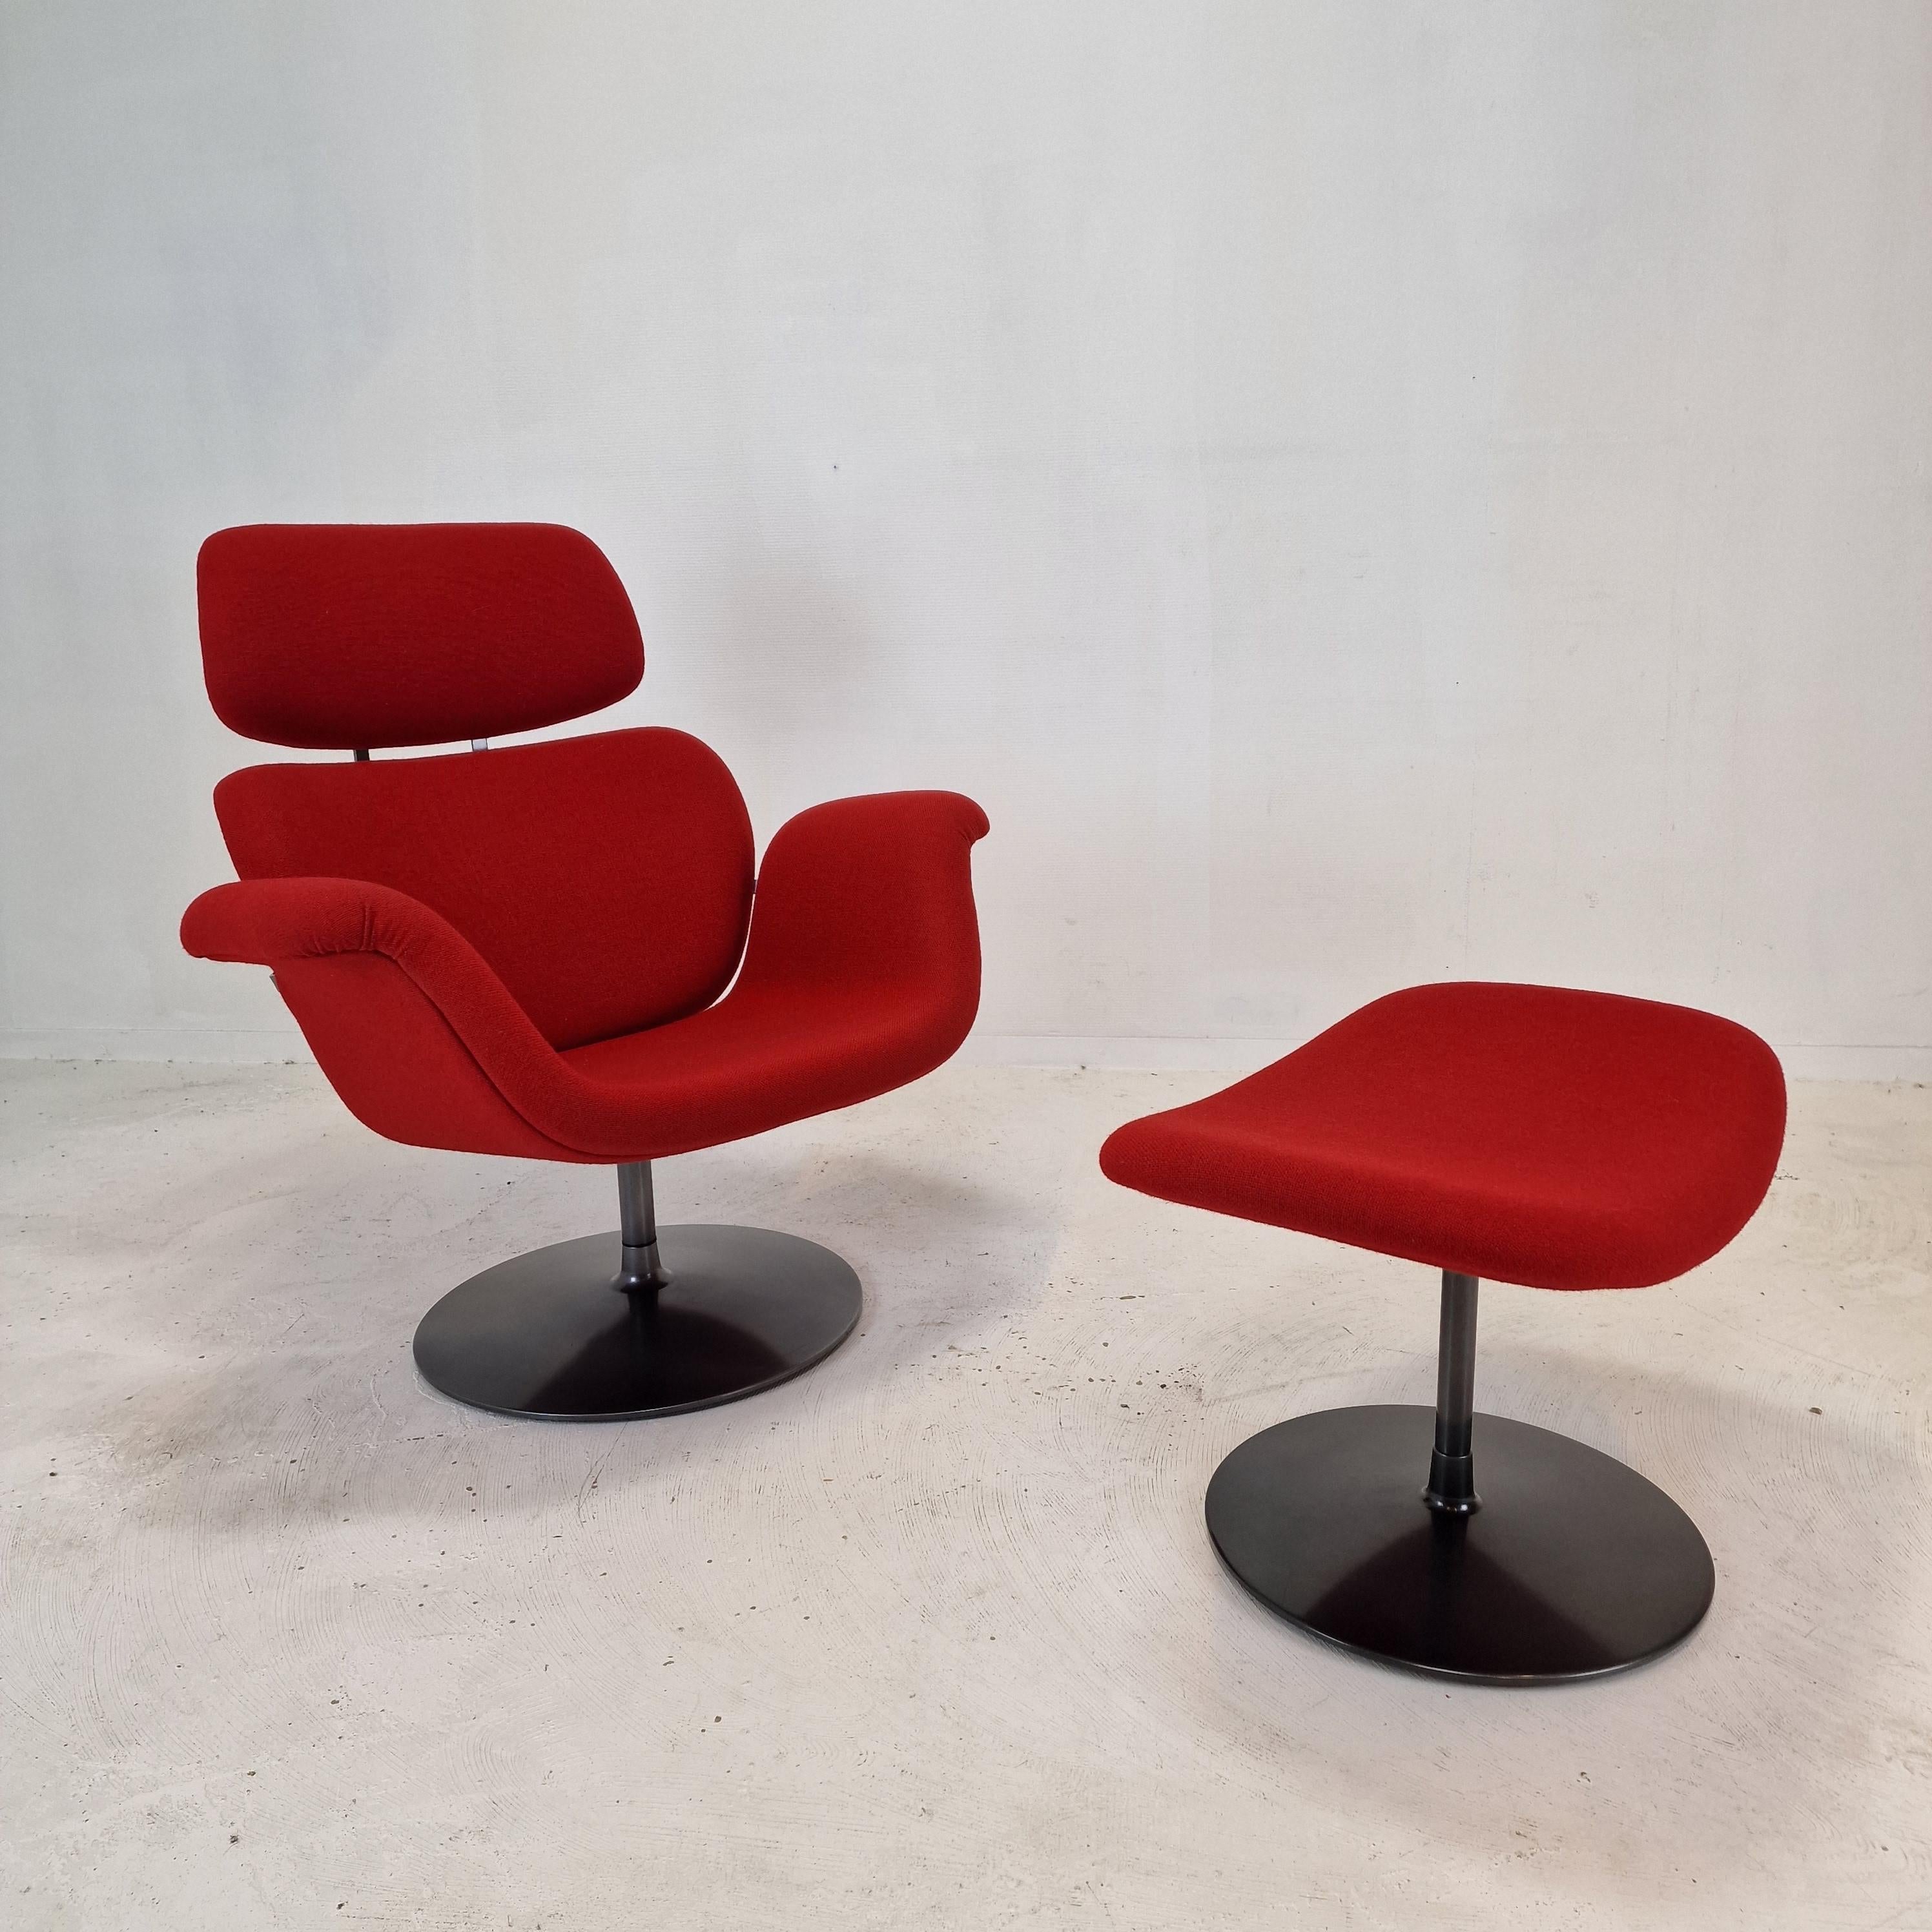 Very comfortable and original big tulip lounge chair with Ottoman, designed by Pierre Paulin for Artifort in 1965. 

This pivoting edition has a round metal foot, it is fabricated in the 2010s

The set is in perfect condition.
The beautiful red